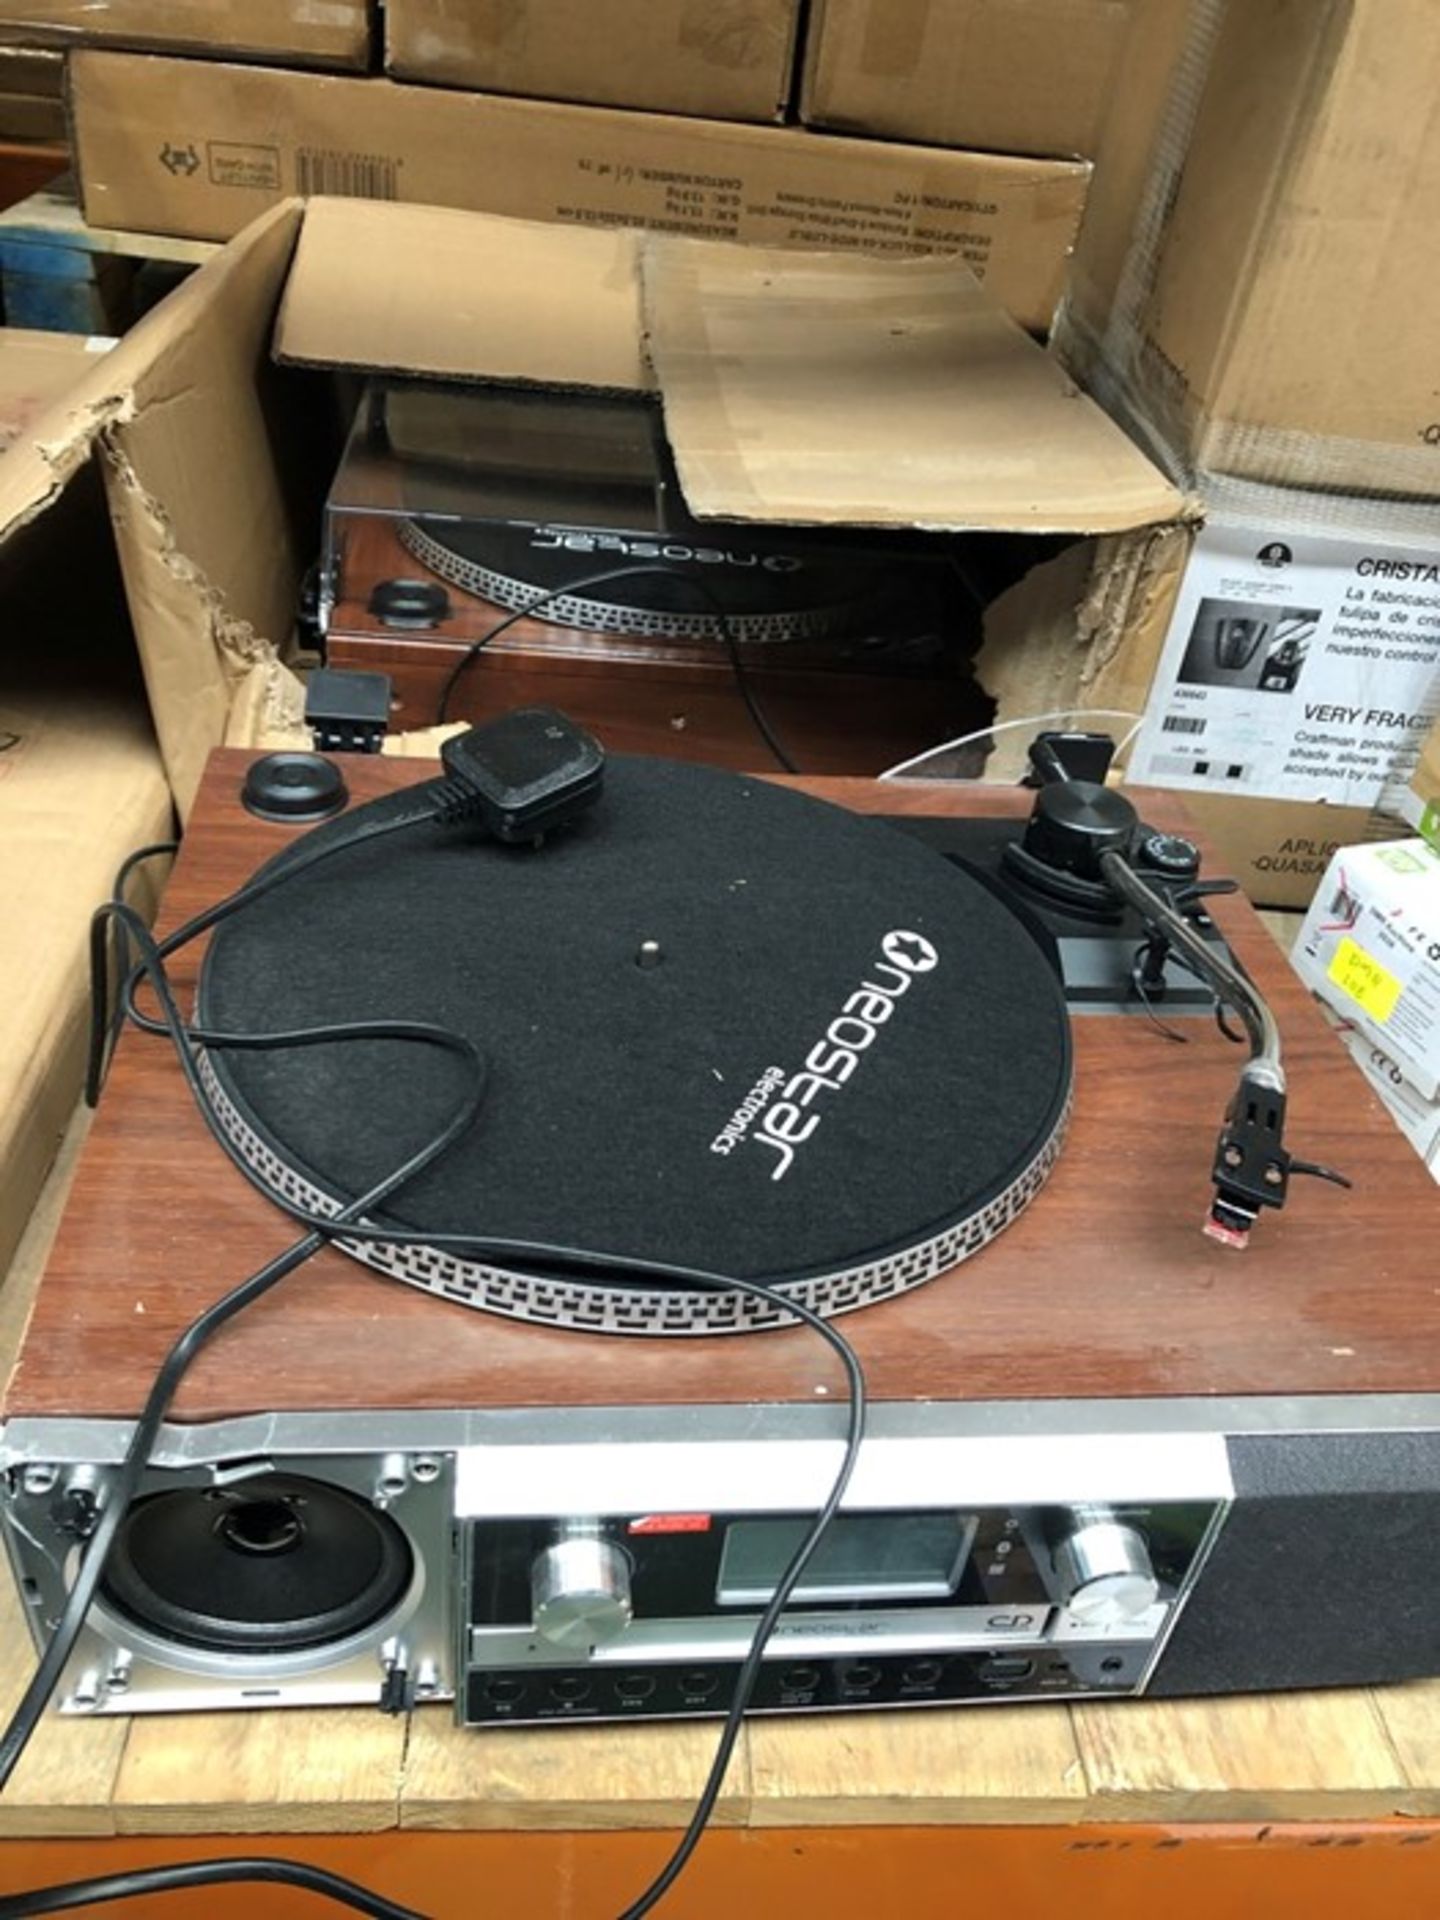 1 LOT TO CONTAIN 2 UNTESTED NEOSTAR TURNTABLES, CASSETTE AND RADIO PLAYER (SOLD AS SEEN)